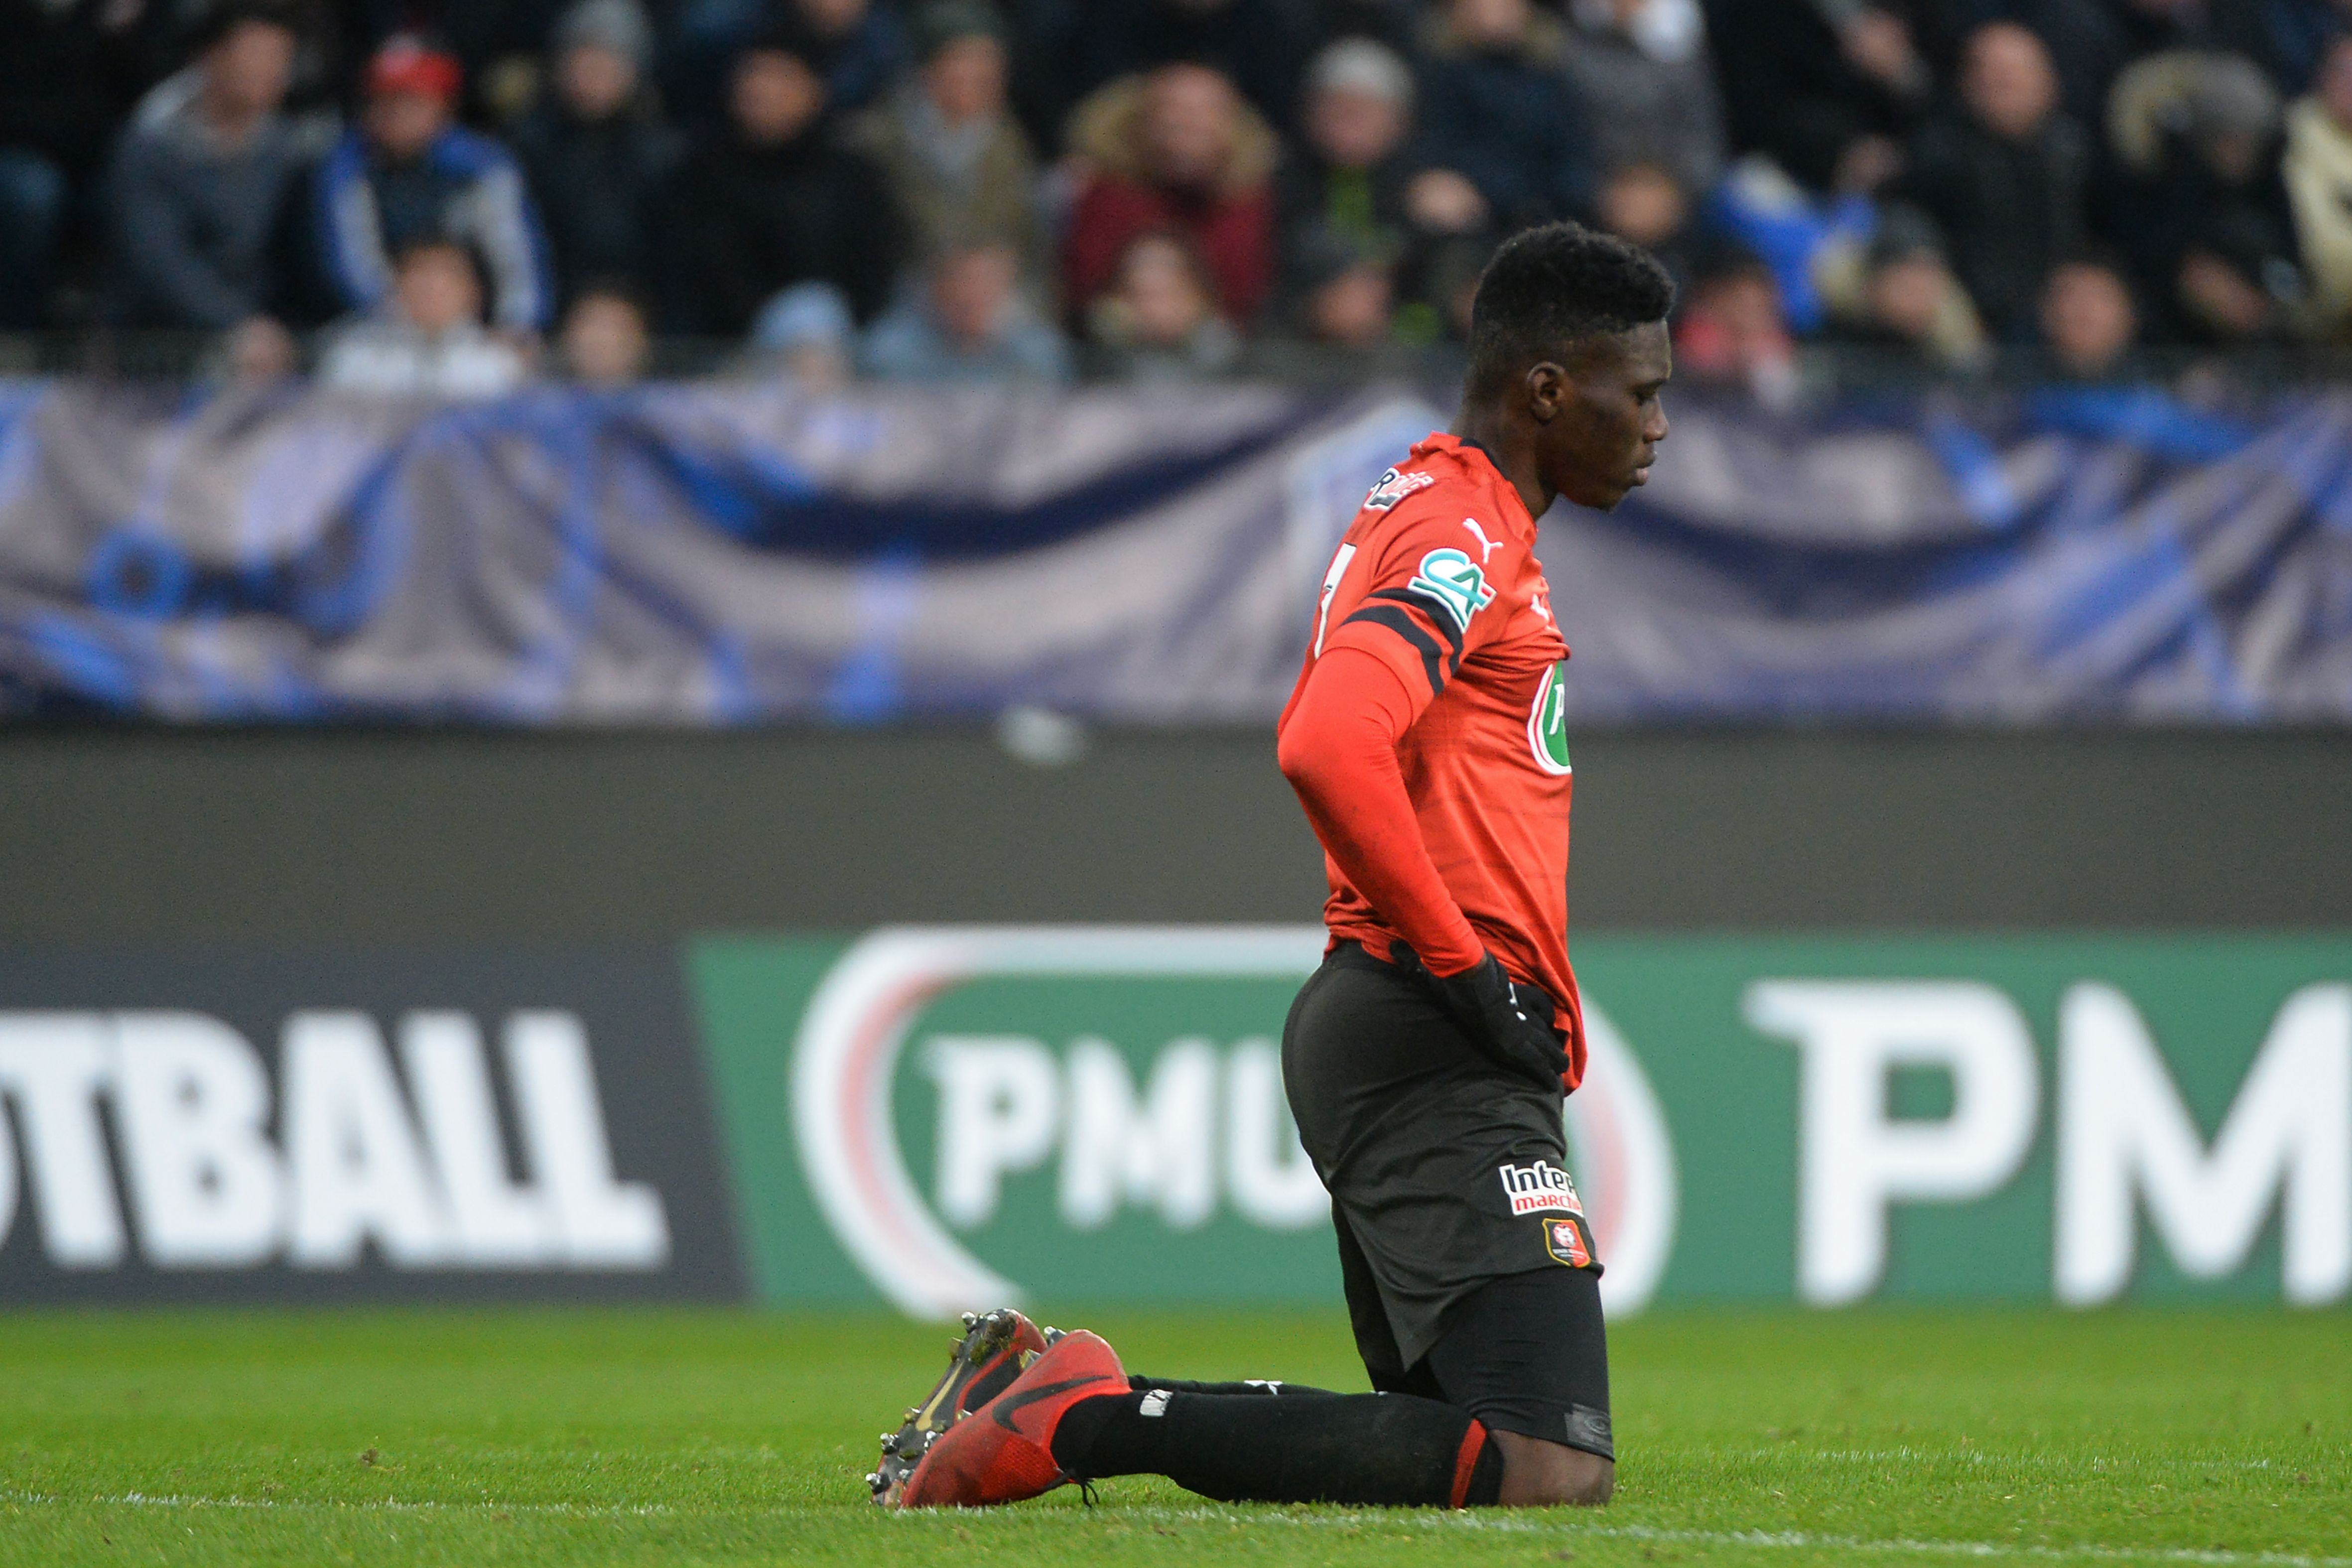 Rennes' Senegalese midfielder Ismaila Sarr reacts during the French Cup last-64 football match between Rennes and Brest, on January 6, 2019, at the Roazhon Park, in Rennes, northwestern France. (Photo by Jean-François MONIER / AFP)        (Photo credit should read JEAN-FRANCOIS MONIER/AFP/Getty Images)